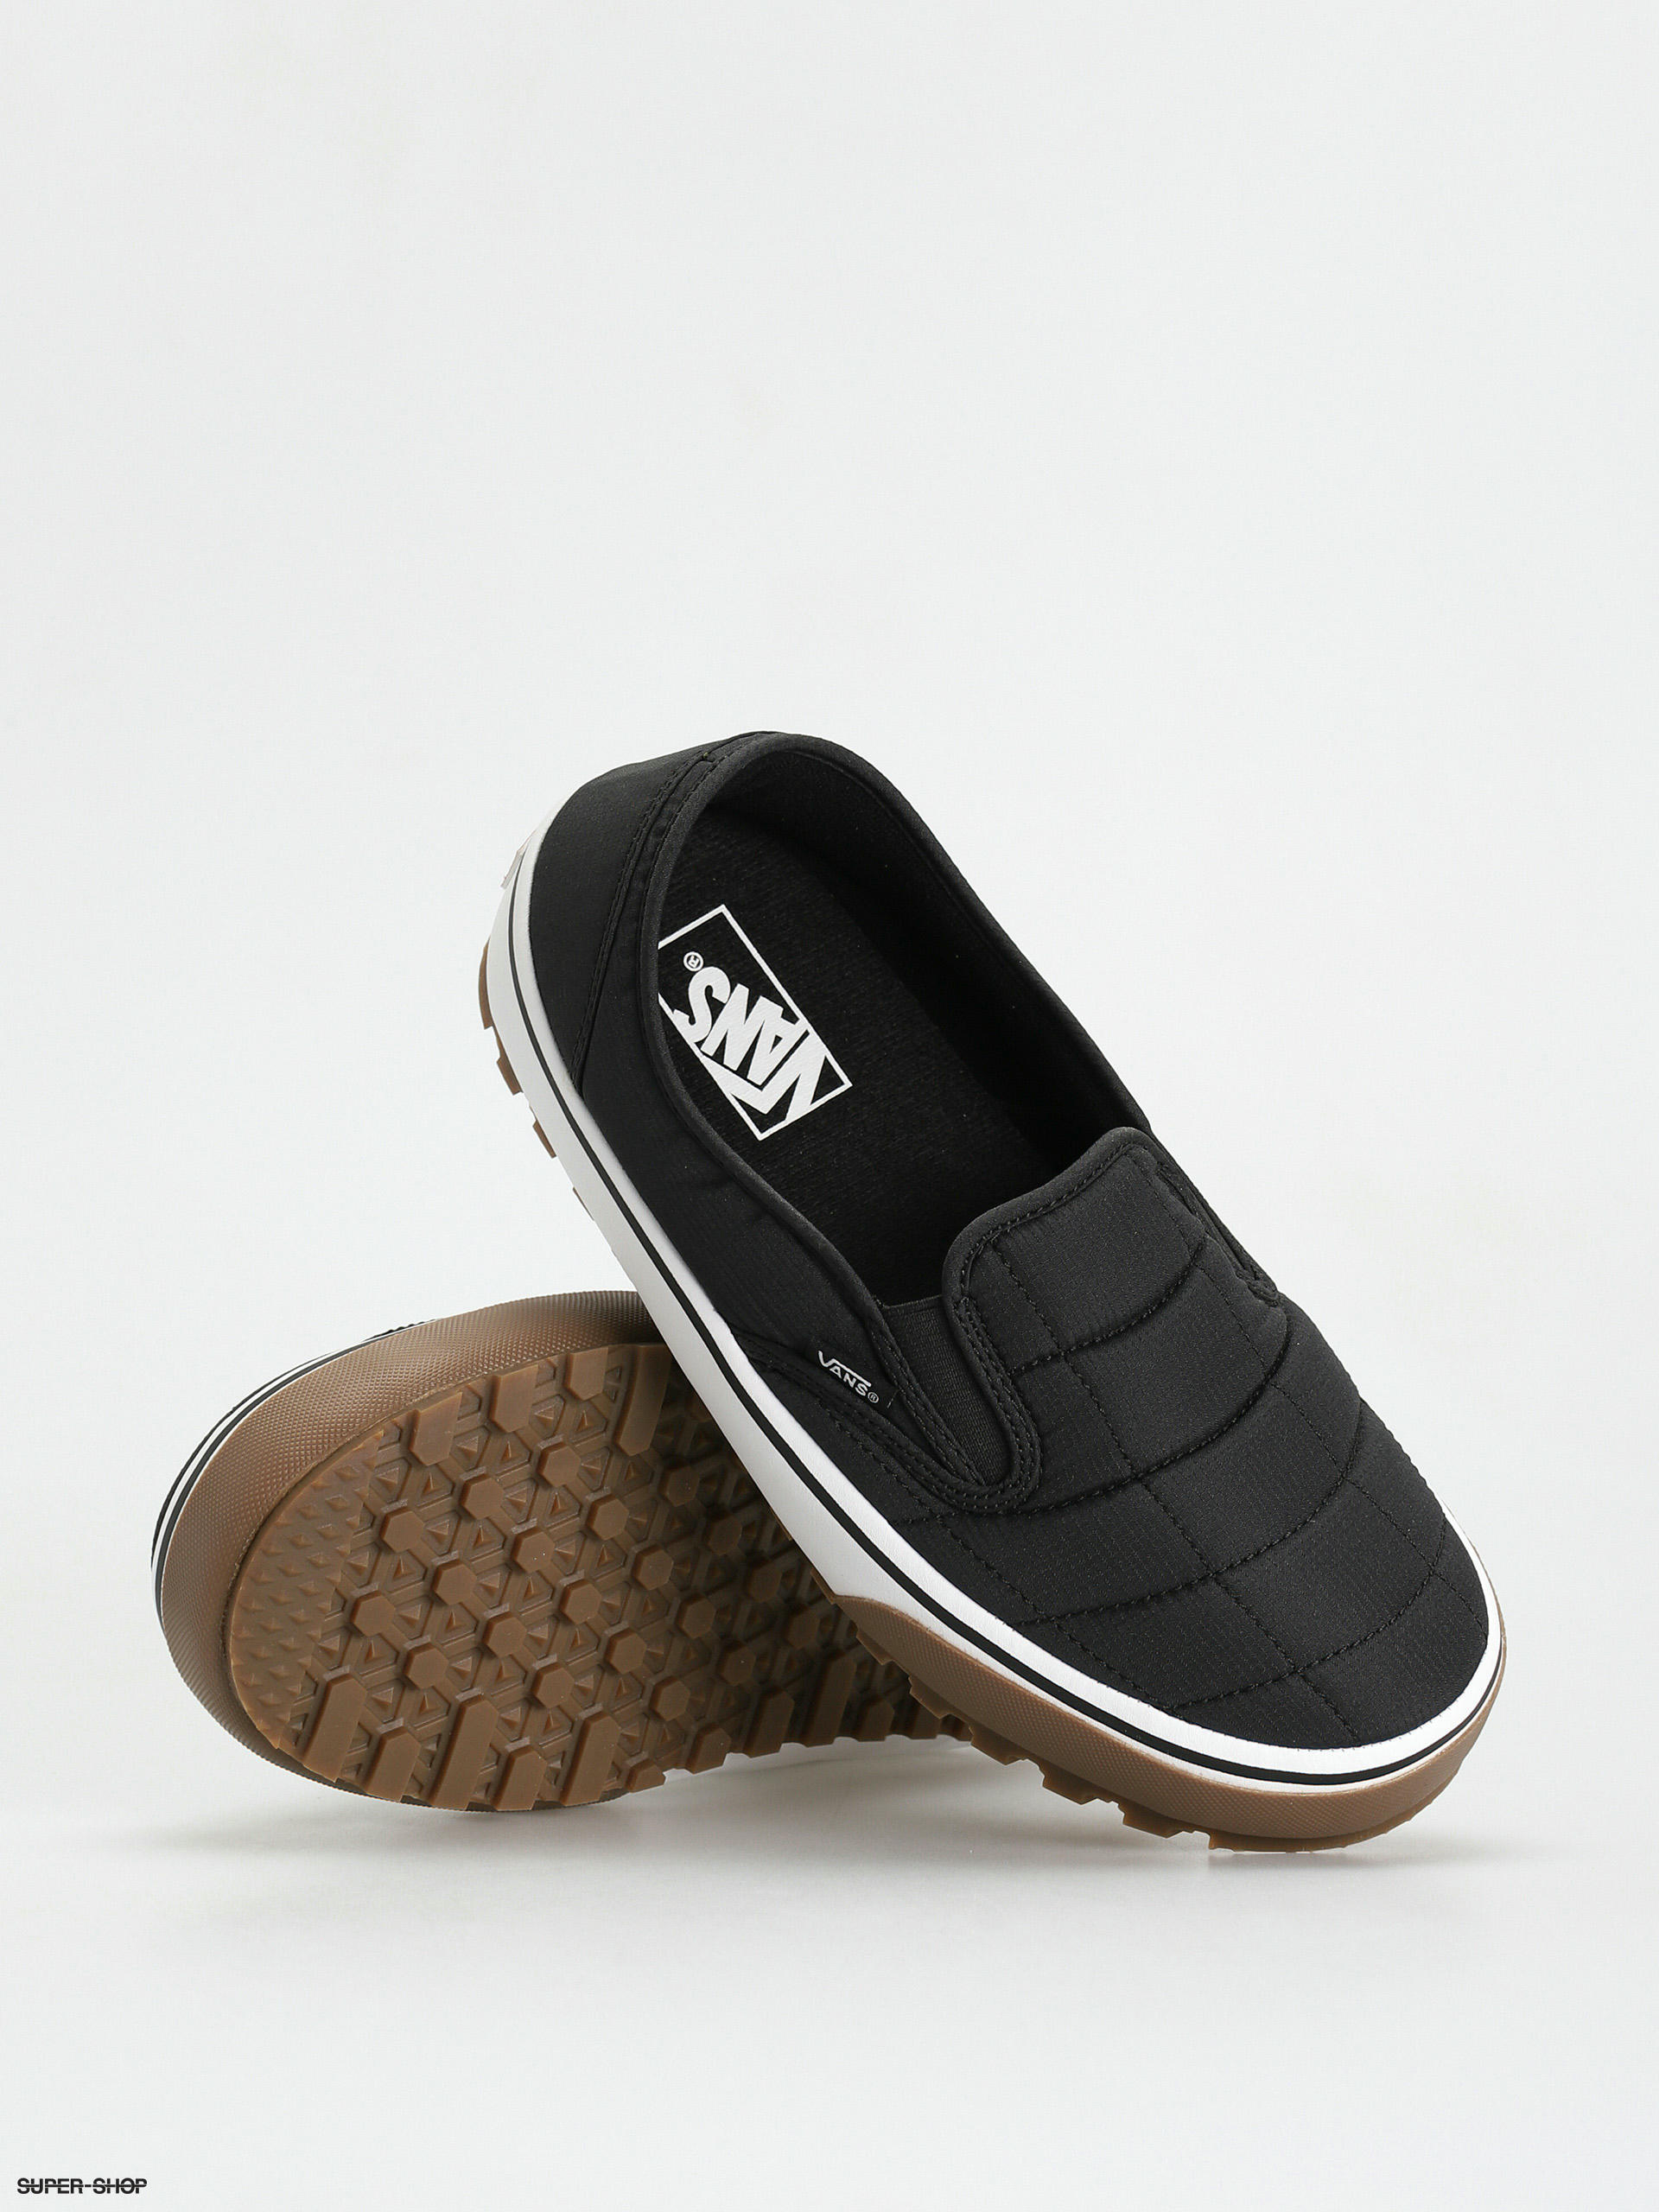 Vans Snow Lodge Slipper guard Shoes (quilted black)